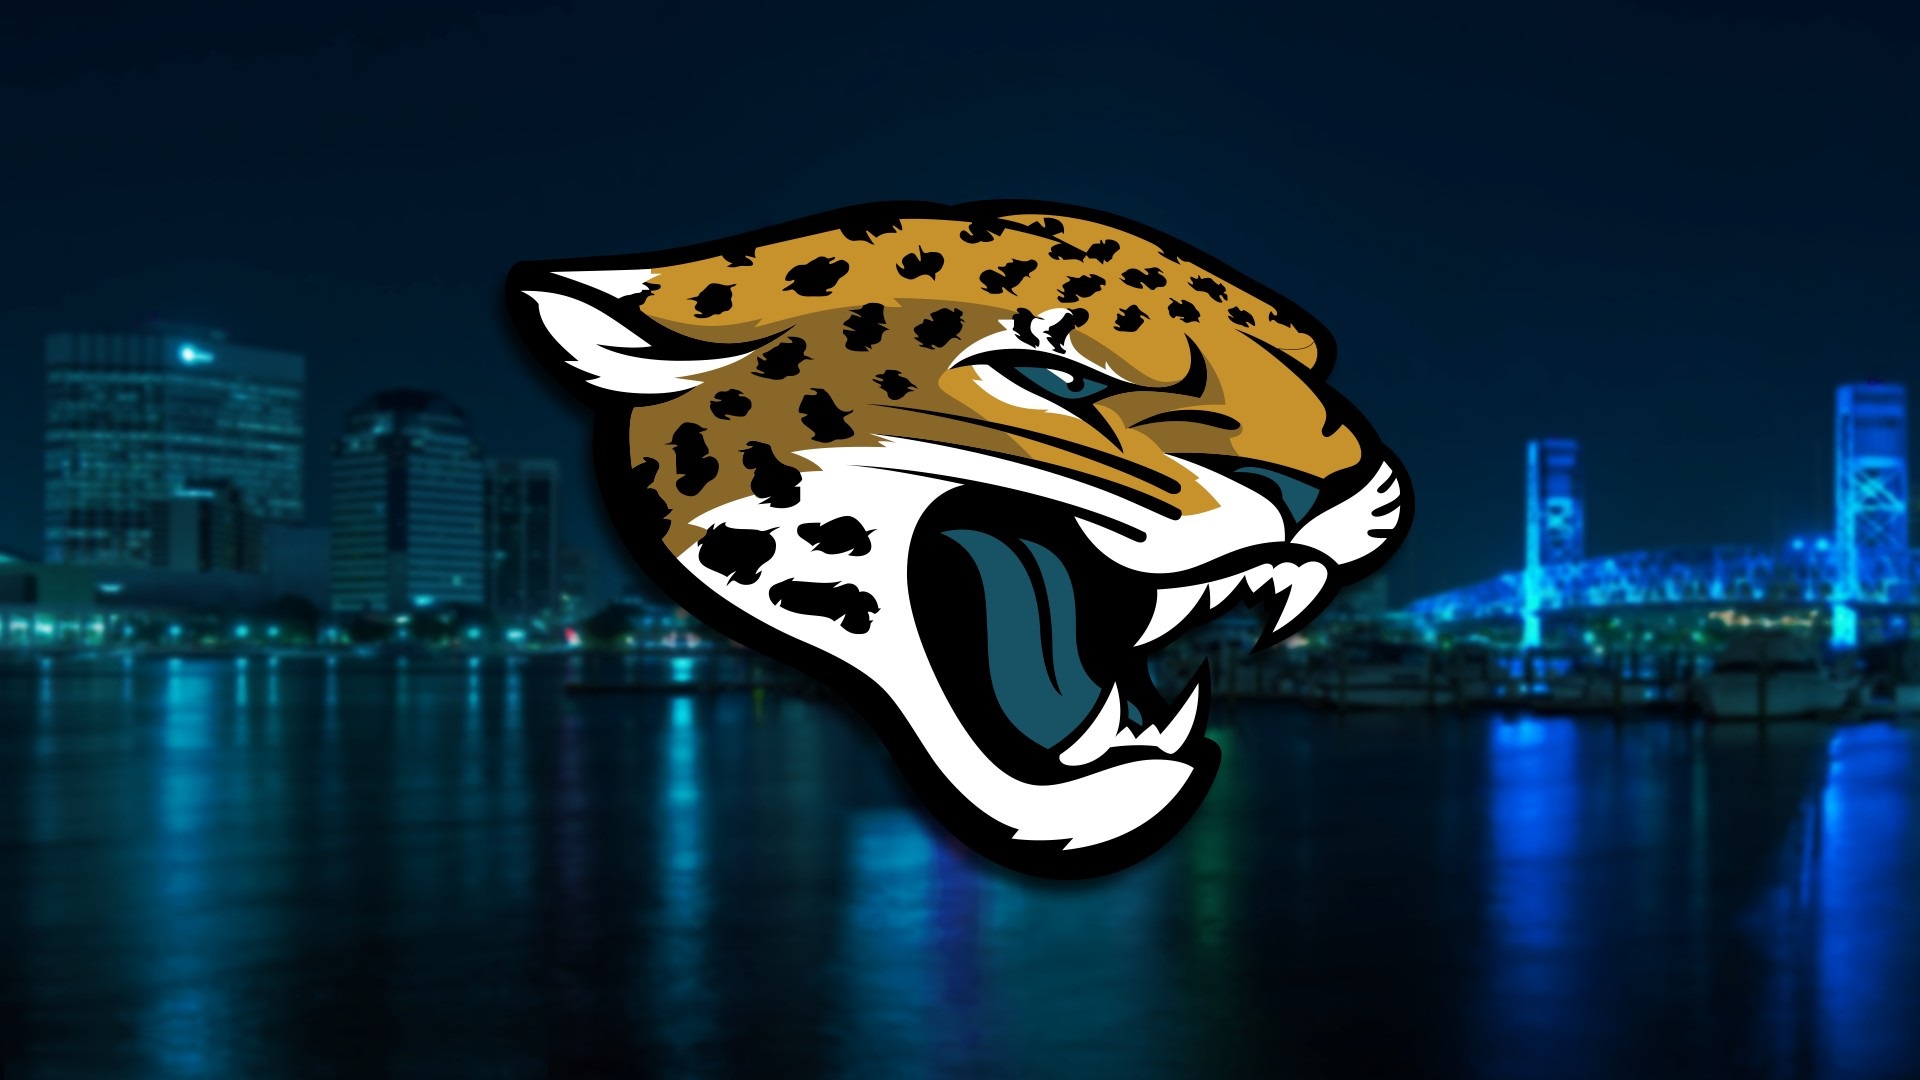 Jacksonville Jaguars NFL Wallpaper HD With high-resolution 1920X1080 pixel. You can use this wallpaper for your Mac or Windows Desktop Background, iPhone, Android or Tablet and another Smartphone device